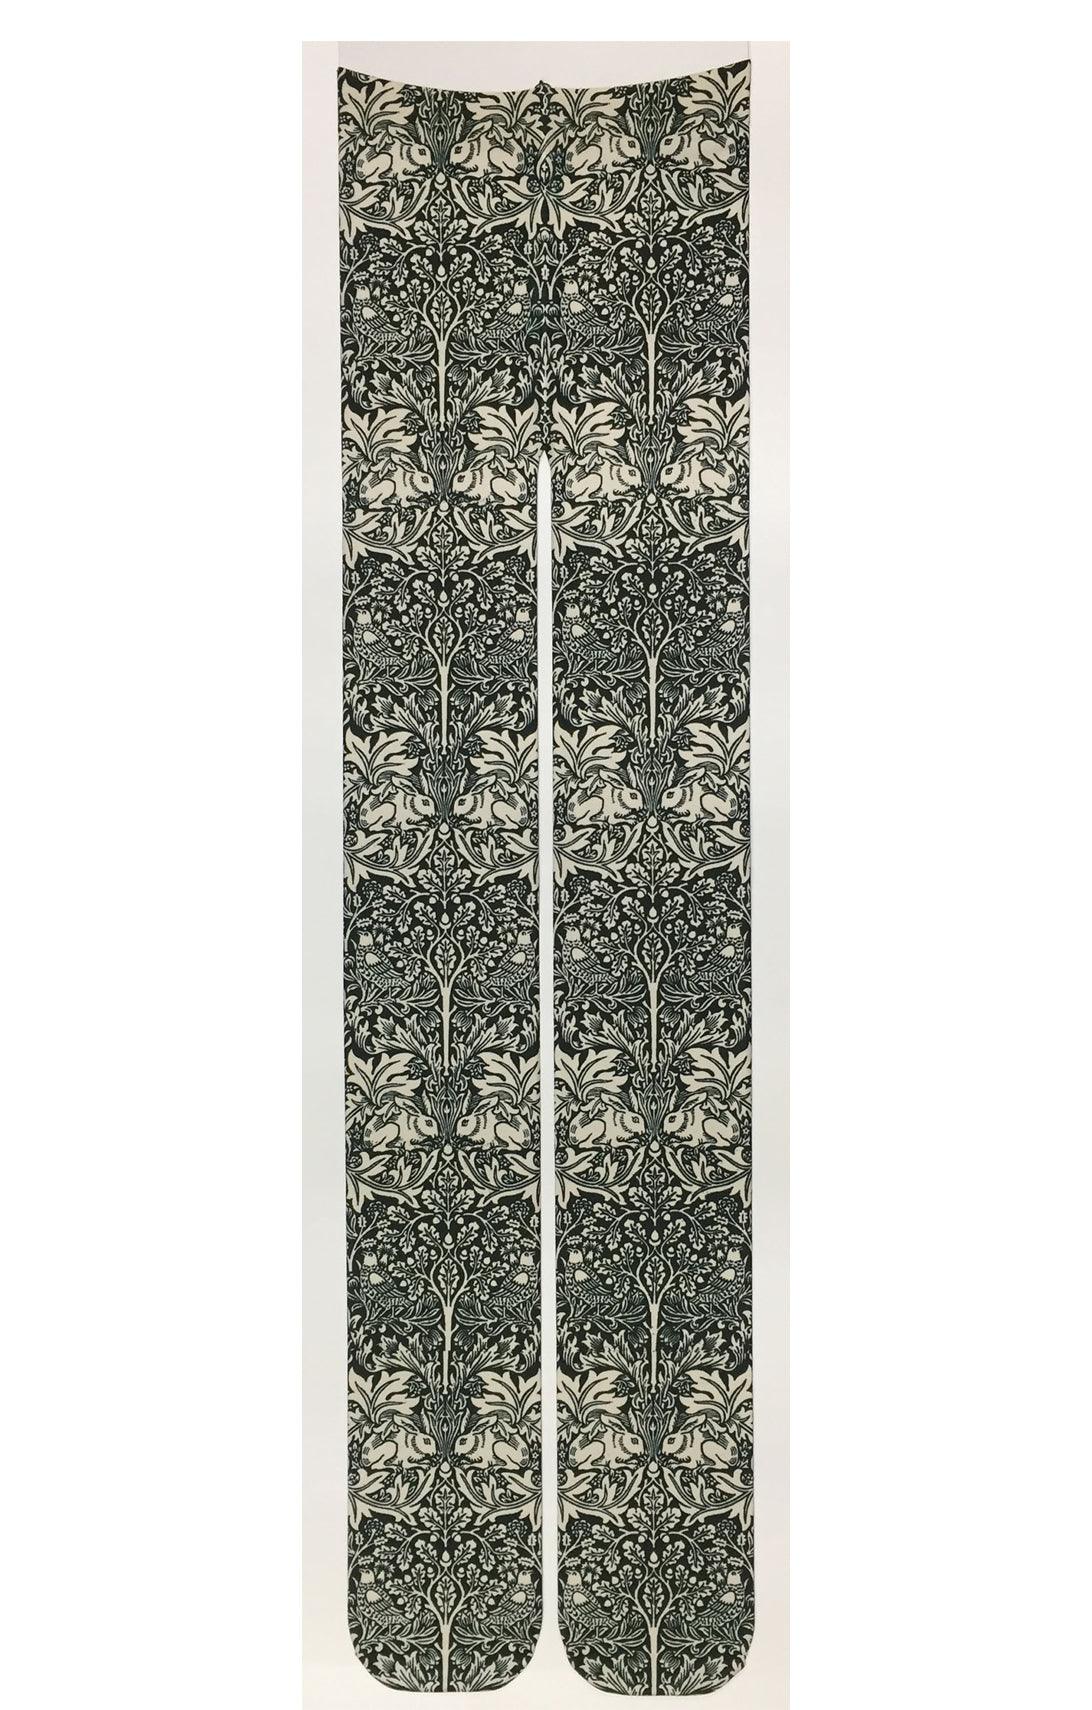 RABBIT BROTHERS by William Morris | Printed Tights - Tabbisocks - The Sock Monster